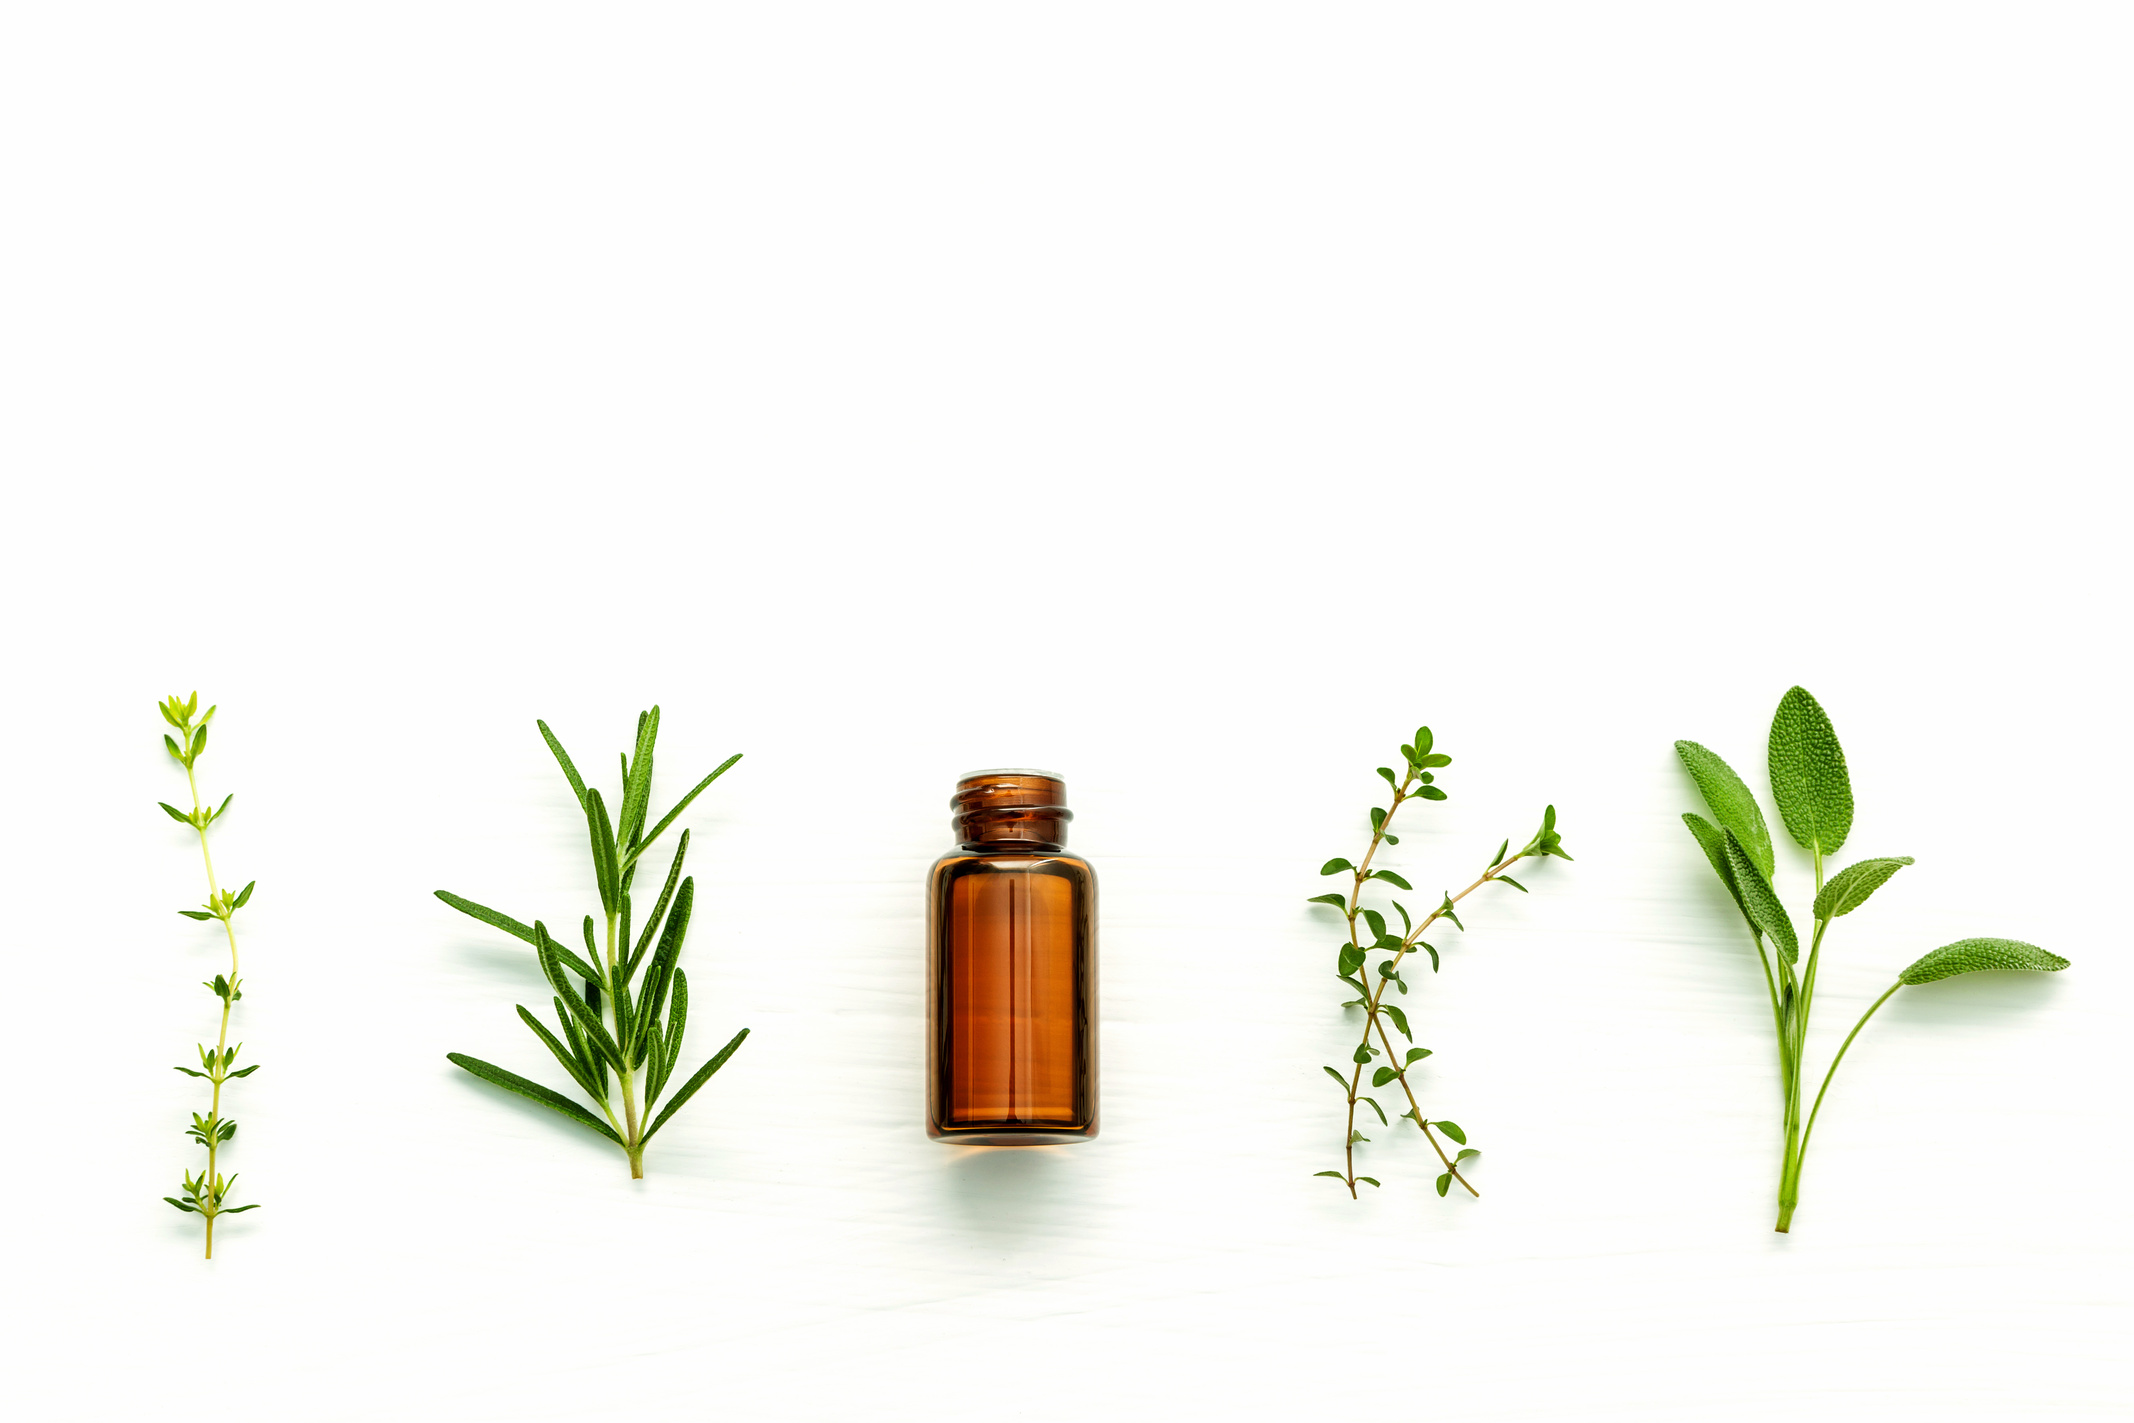 Bottle of essential oil with  fresh herbal sage, rosemary, thyme